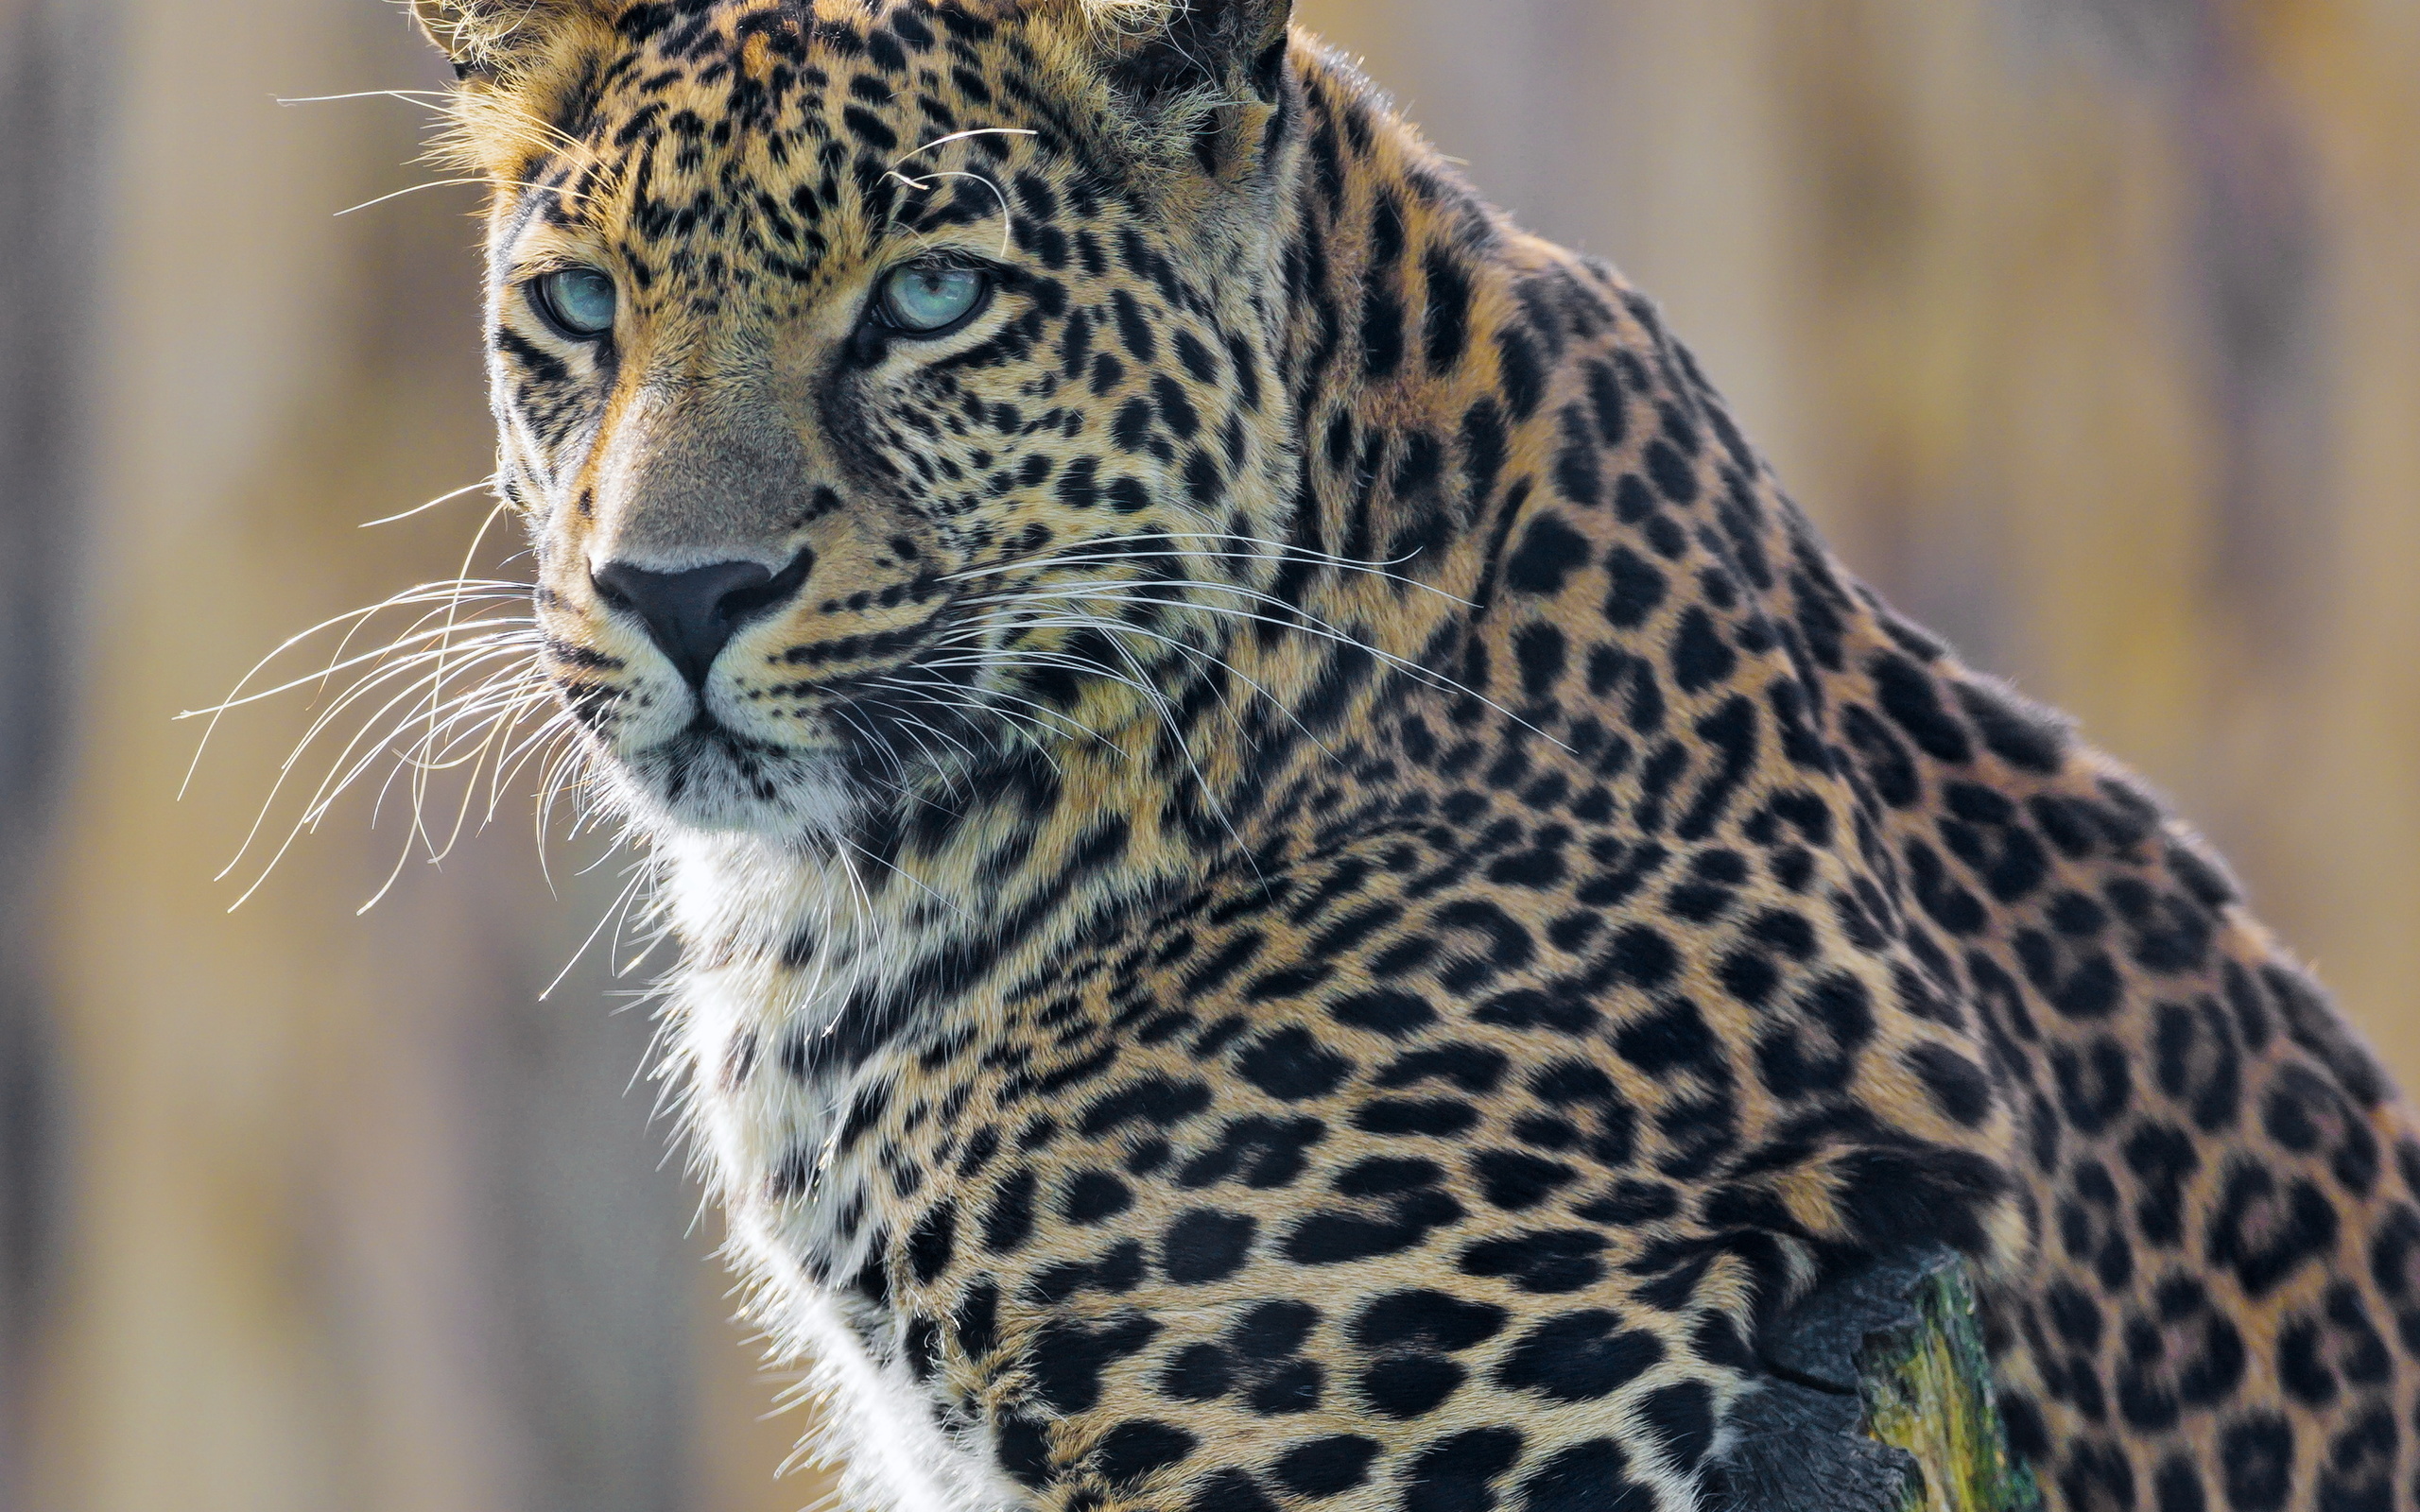 young, male, leopard, posing, branch